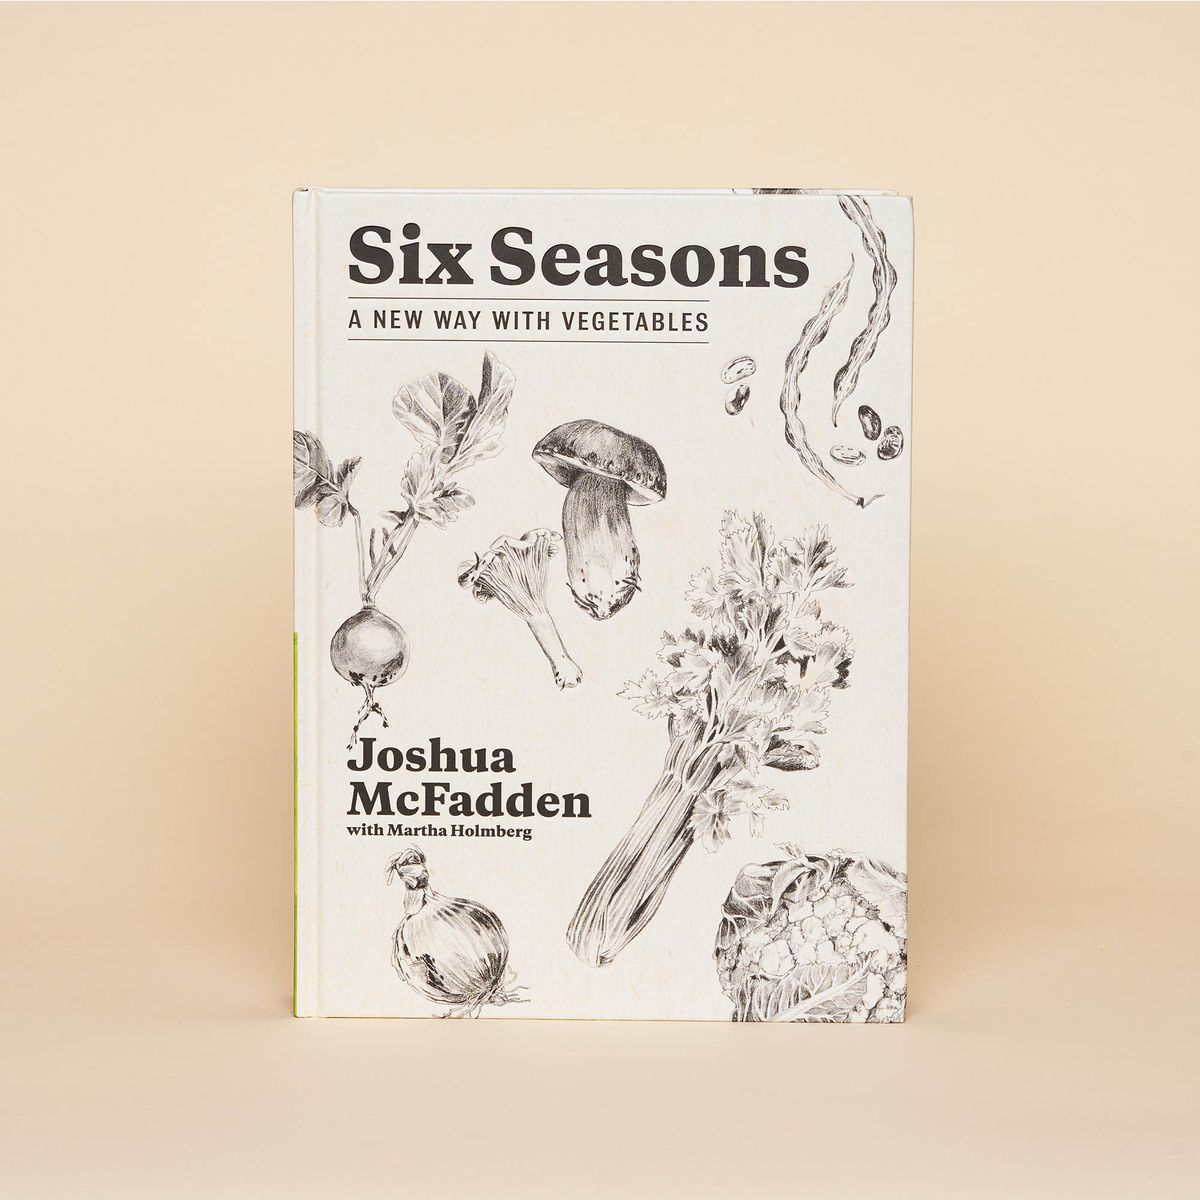 An off-white cookbook with delicate illustrations of beets, onions, mushrooms, green beans and celery